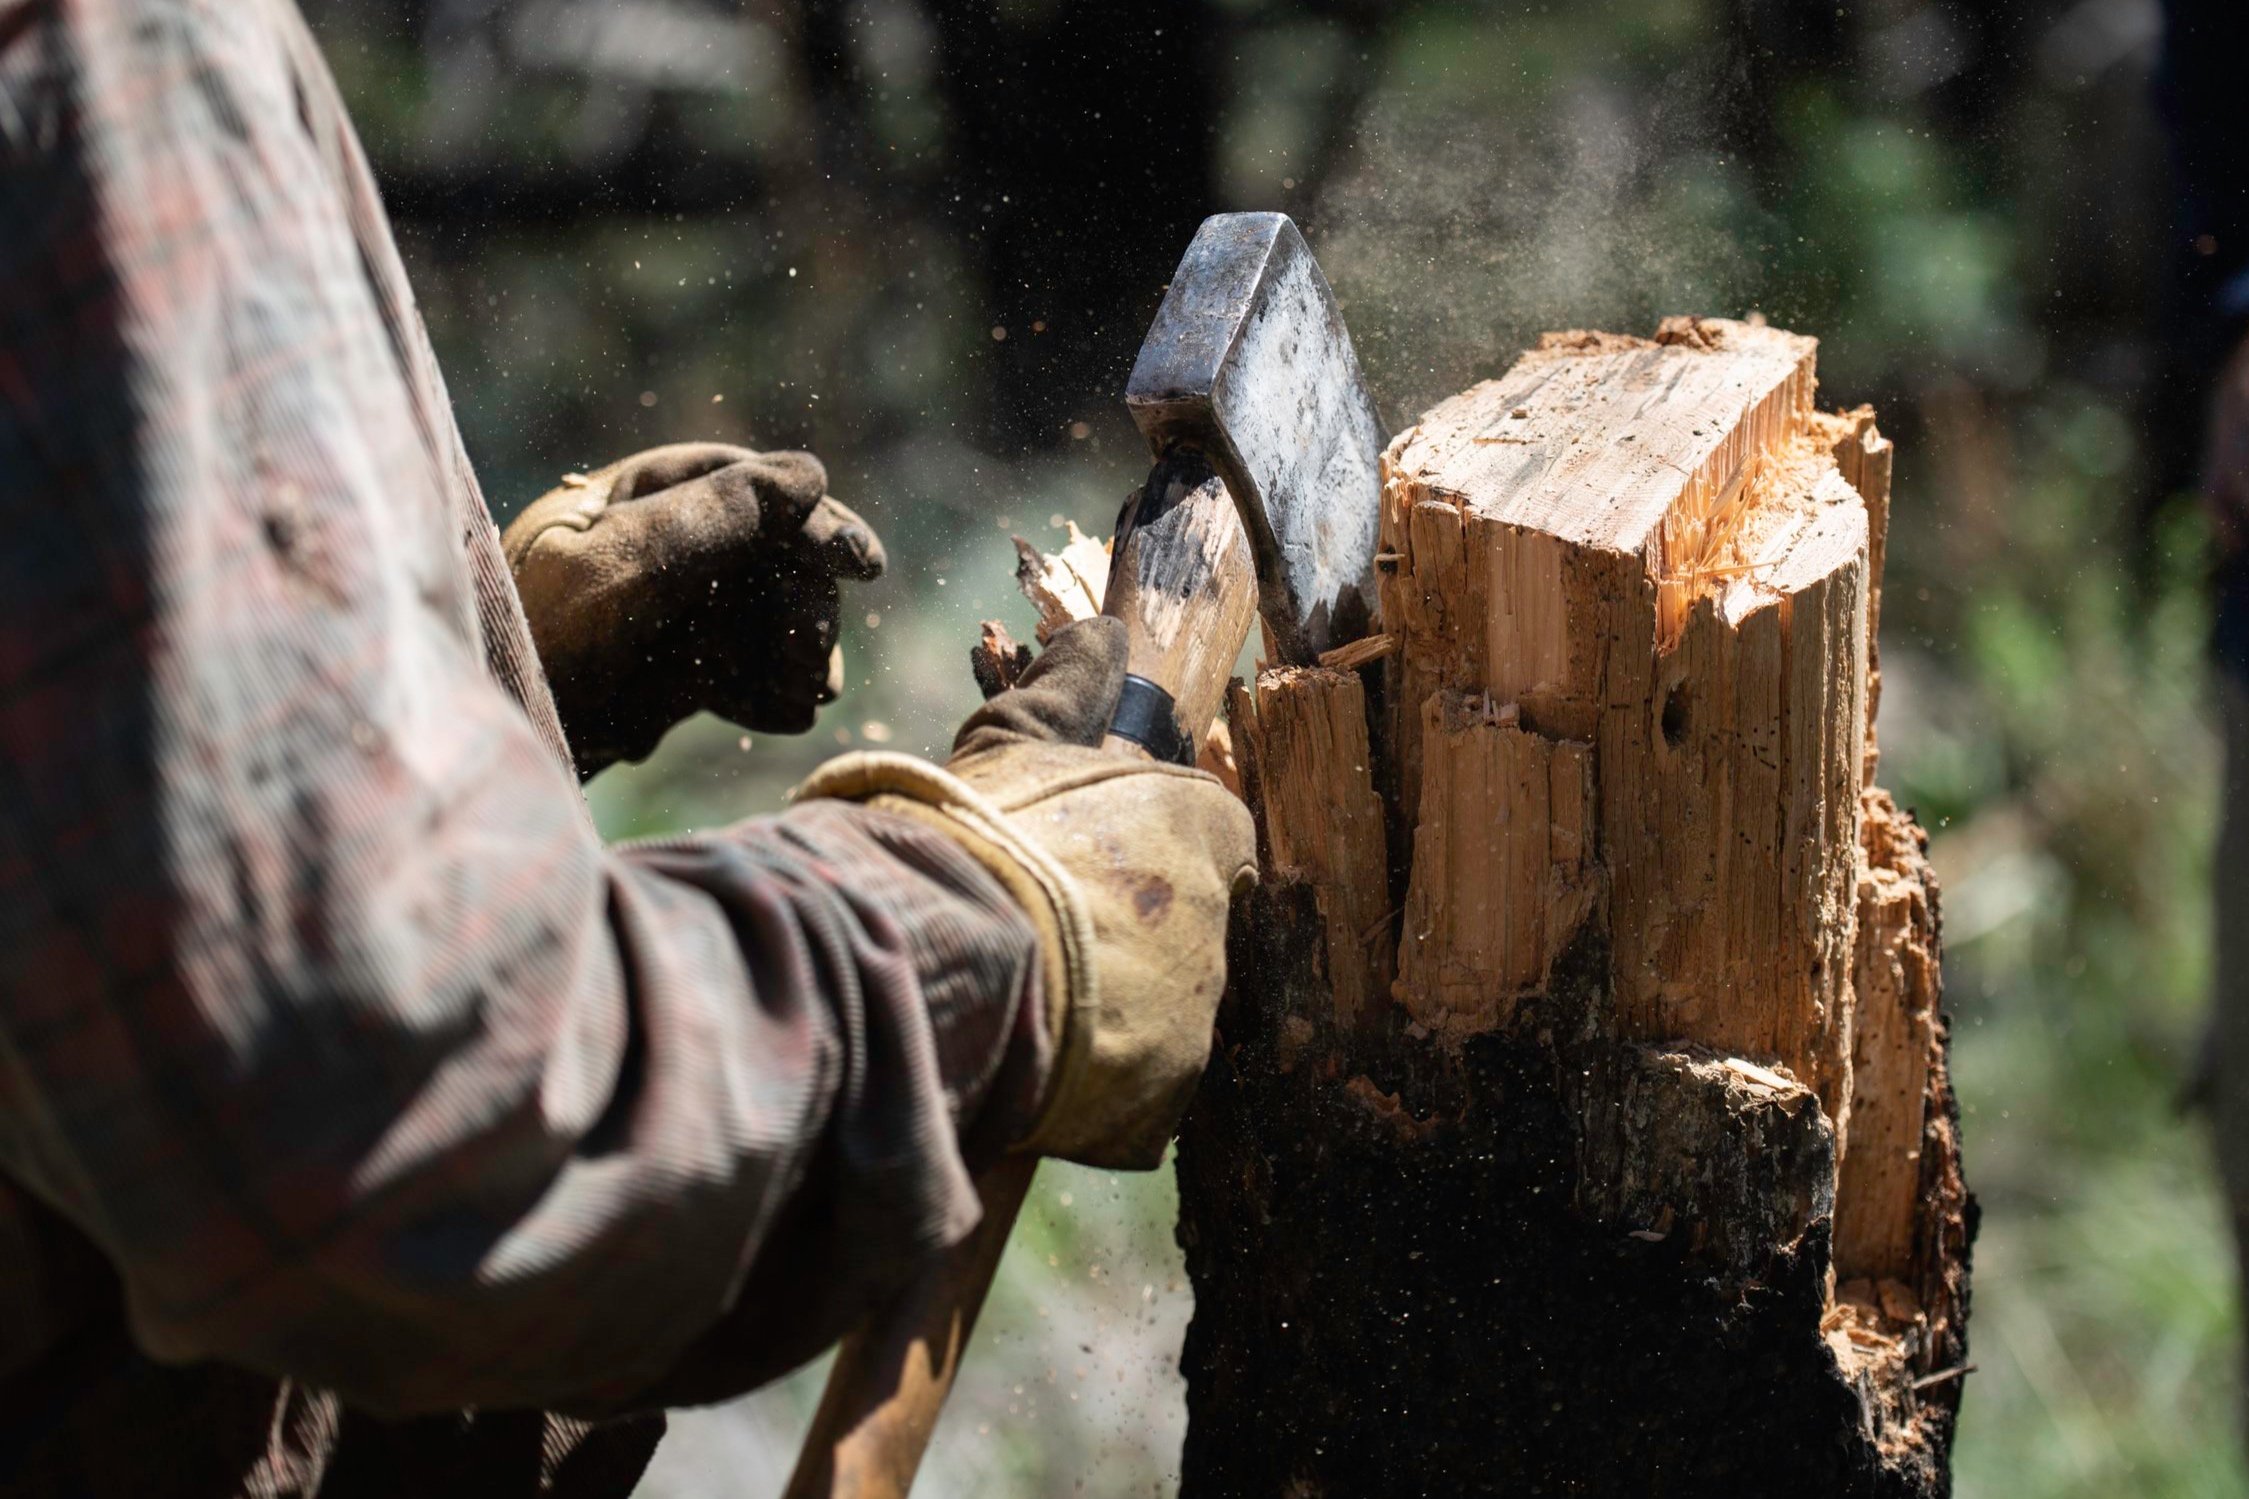  Ben Skidmore chops off the rotten exterior of a snag, a burned tree, demonstrating the hazards of felling them at Philmont Scout Ranch in Cimarron, N.M. on July 12, 2022. Skidmore spent the day teaching conservation staff how to fell hazard trees as